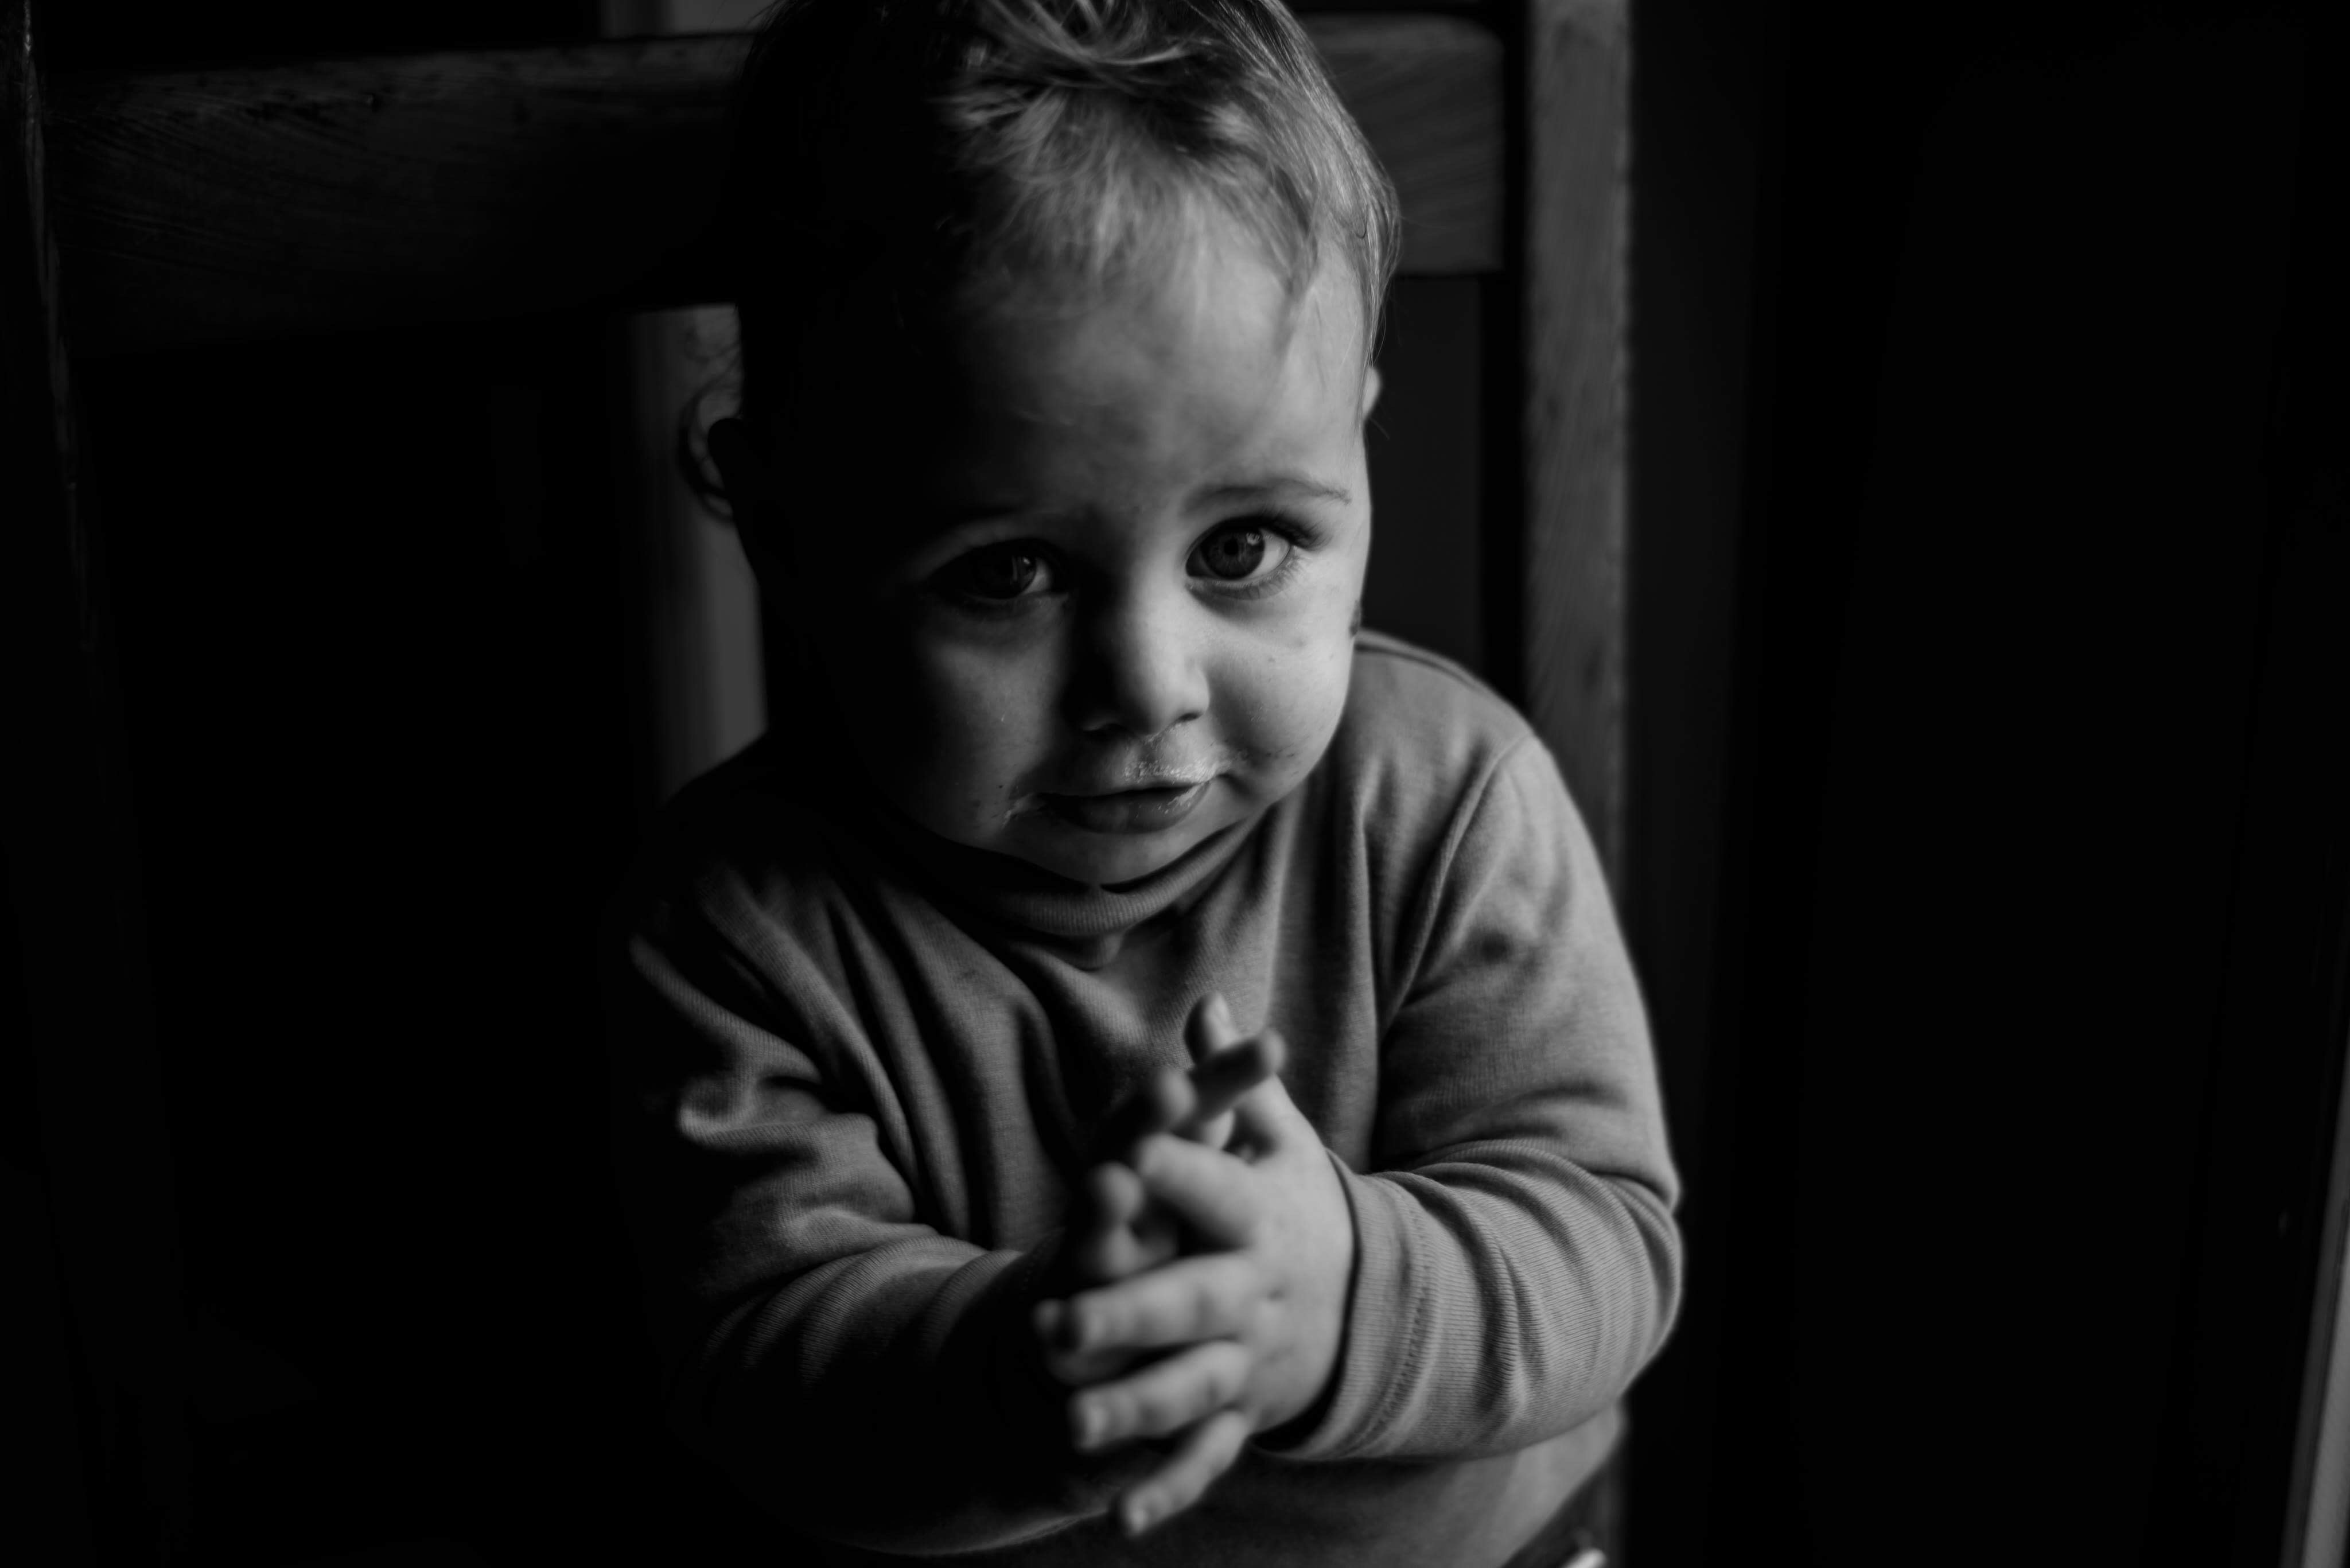 Grayscale photo of baby sitting on chair